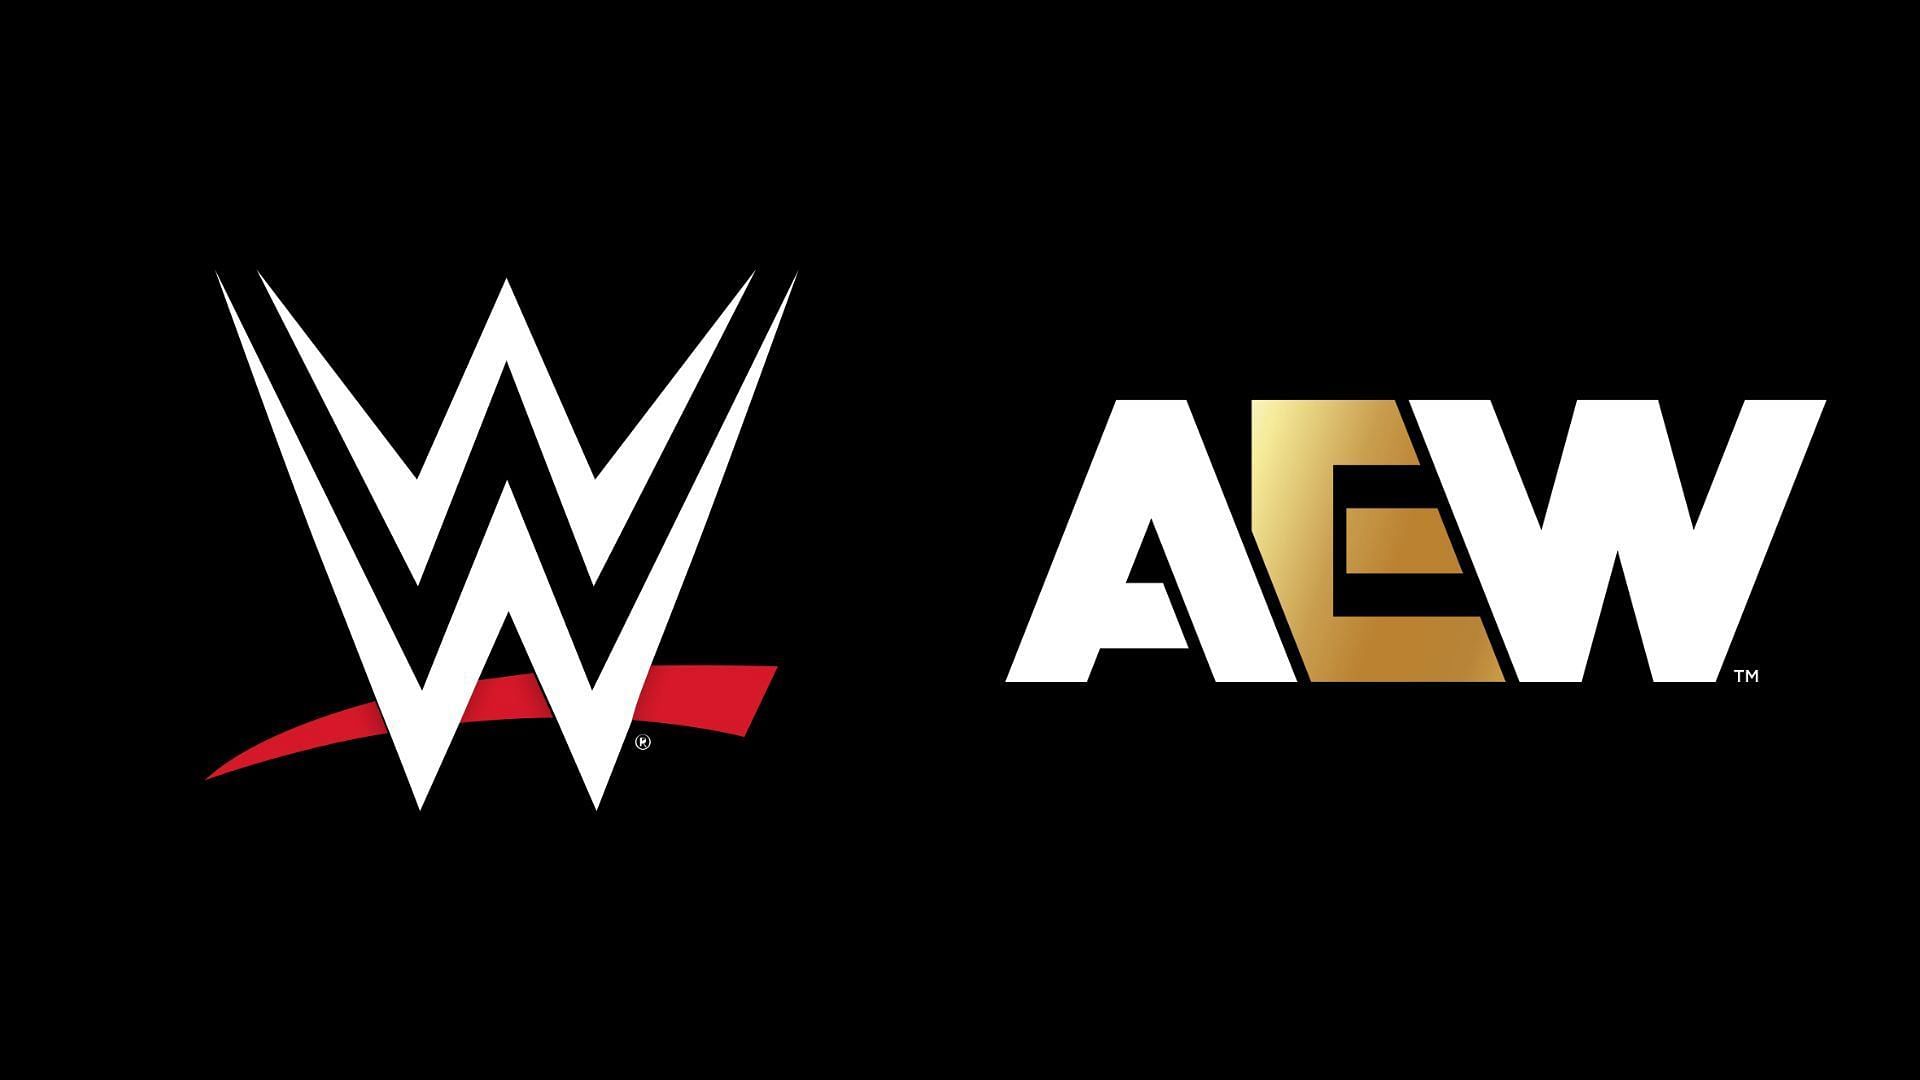 WWE and AEW are top players in the wrestling industry [Photo courtesy of their respecitve social media accounts]